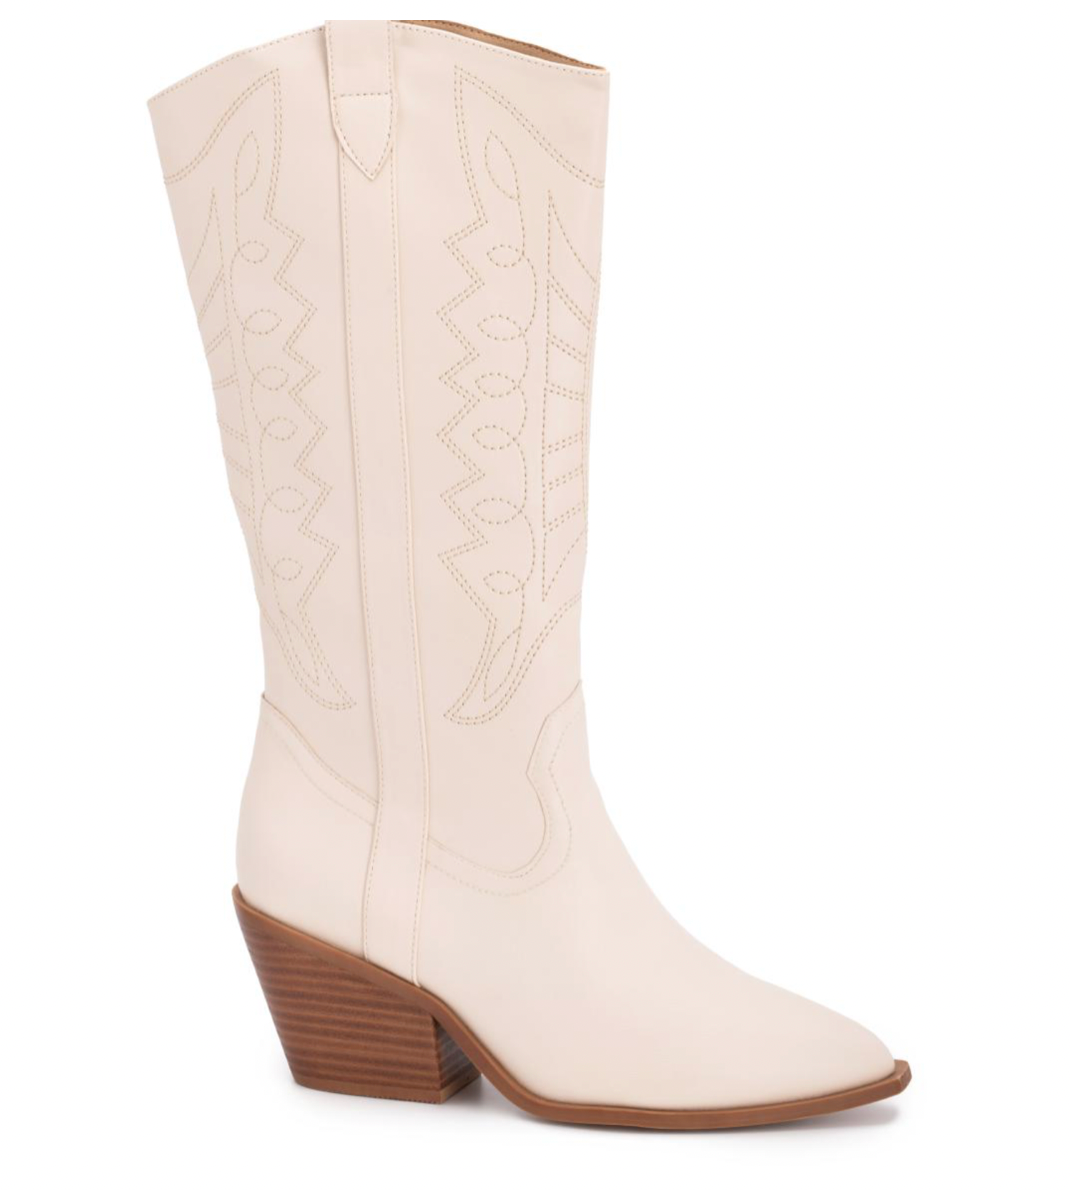 Corky's Howdy Boot - Winter White